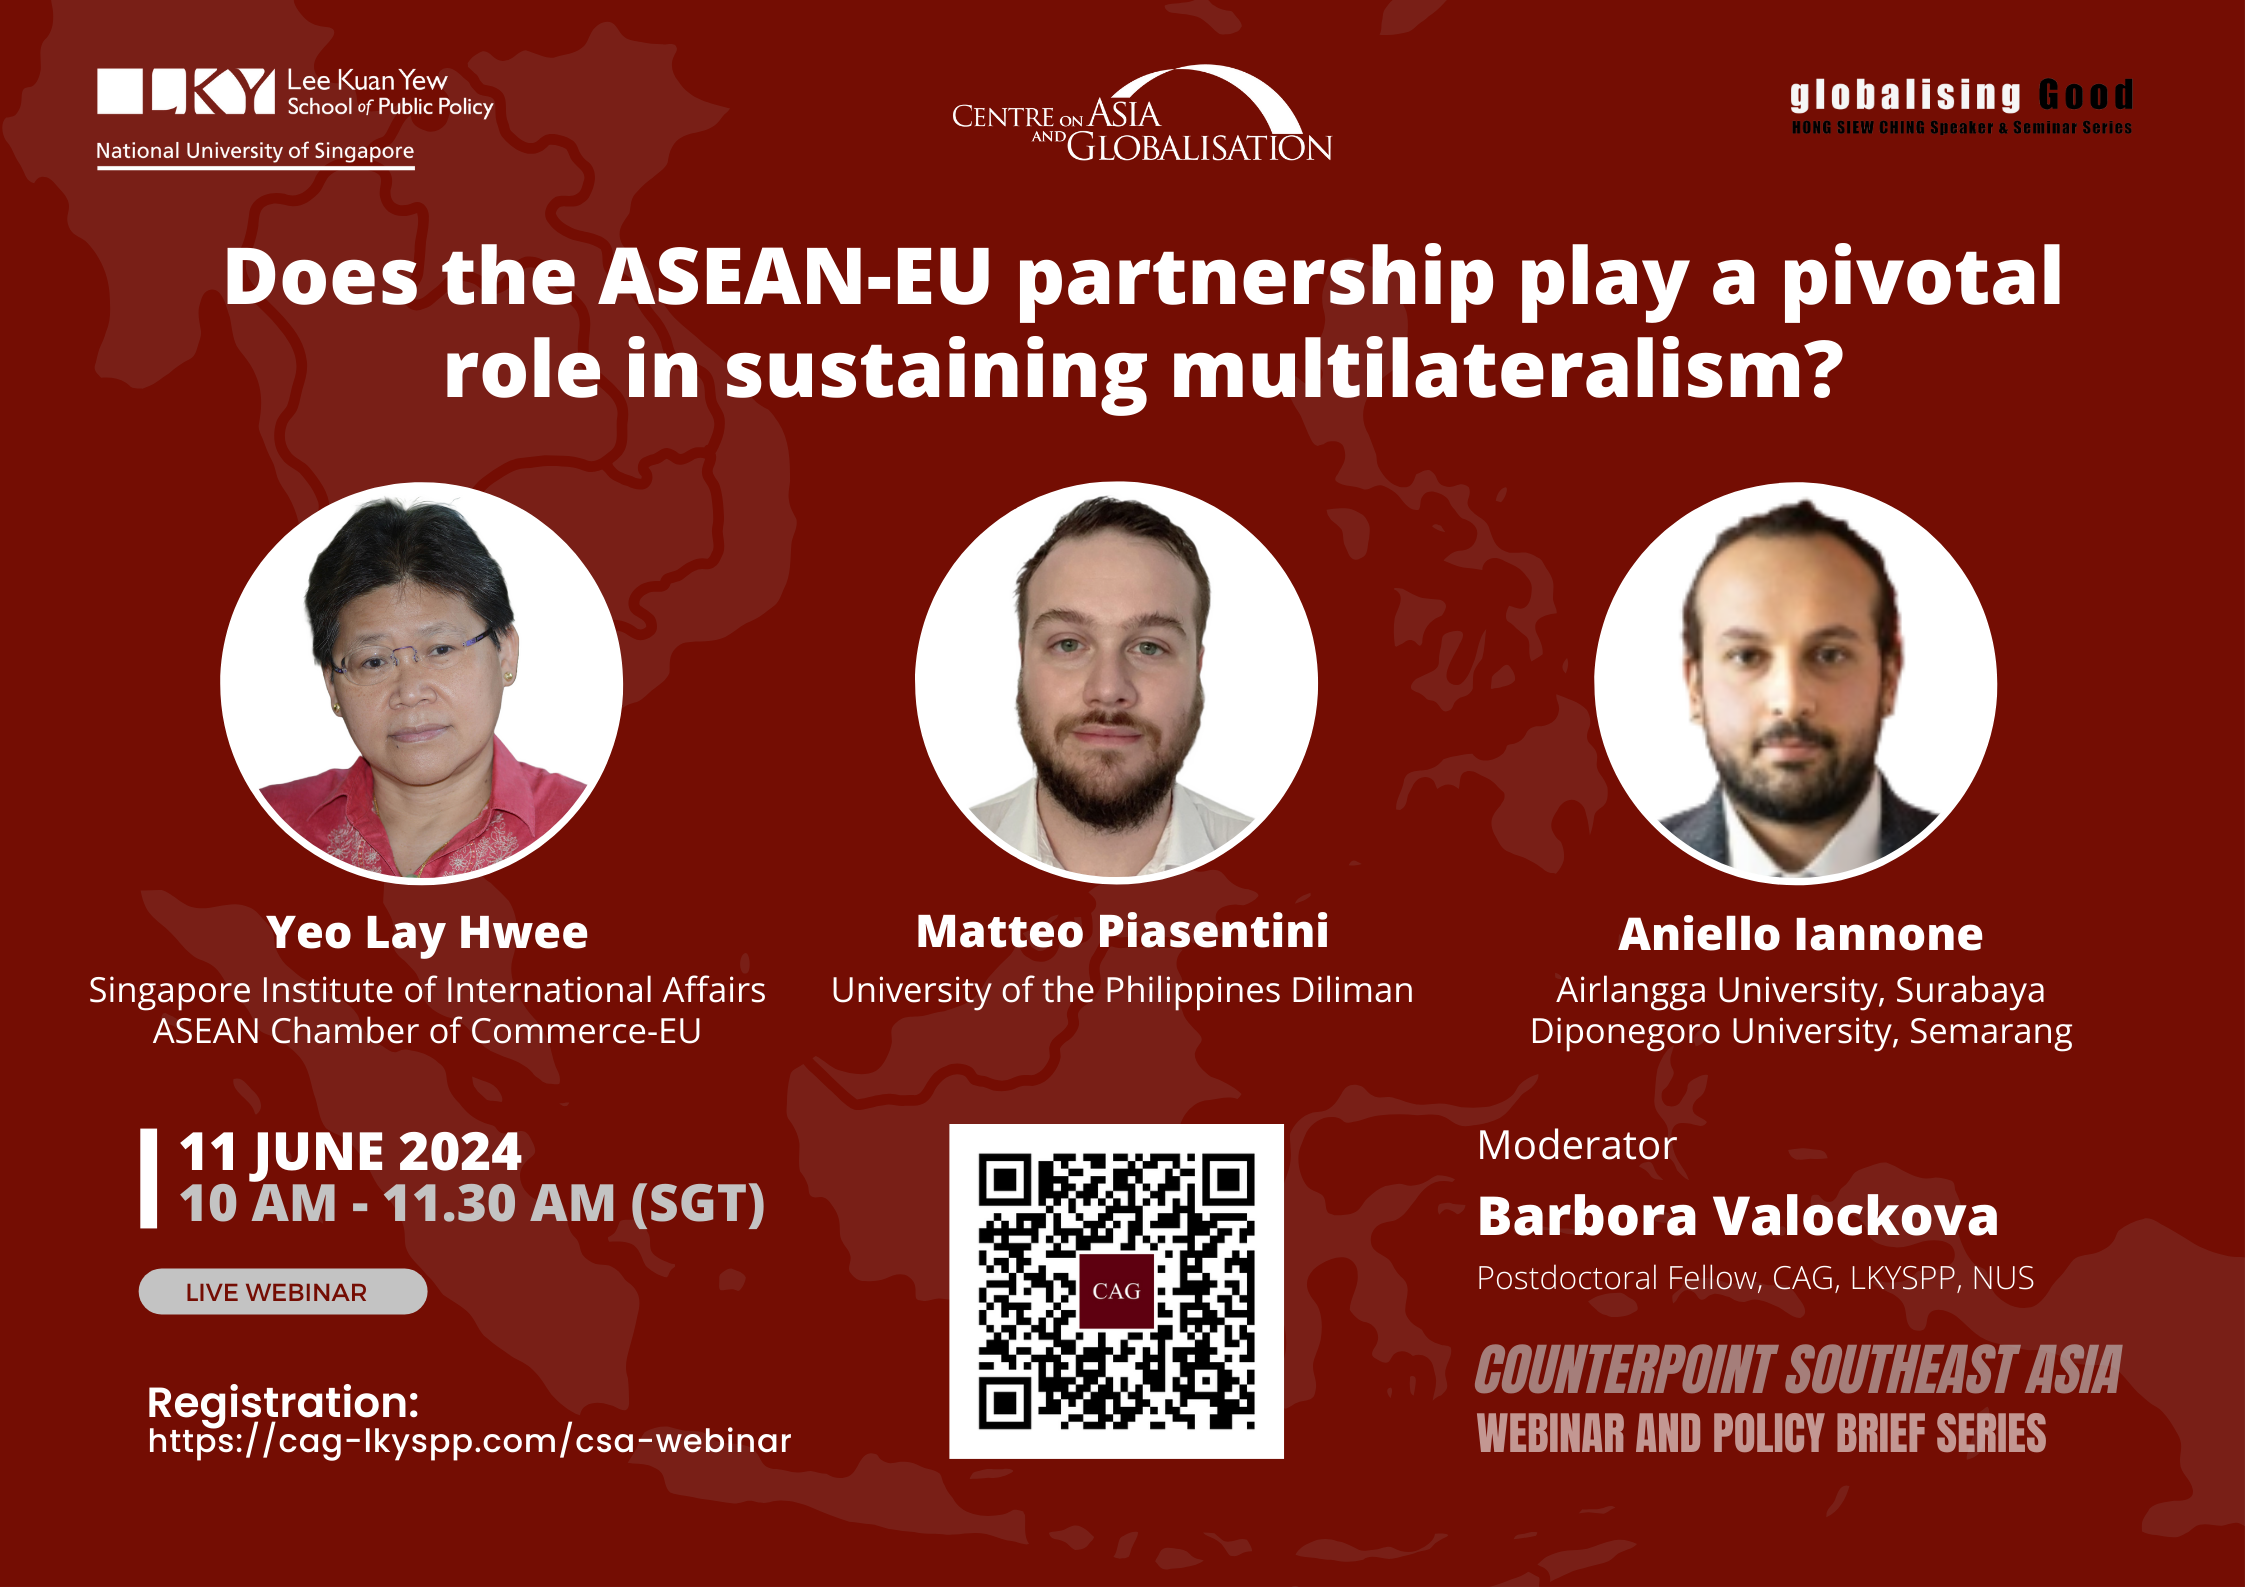 Does the ASEAN-EU partnership play a pivotal role in sustaining multilateralism?